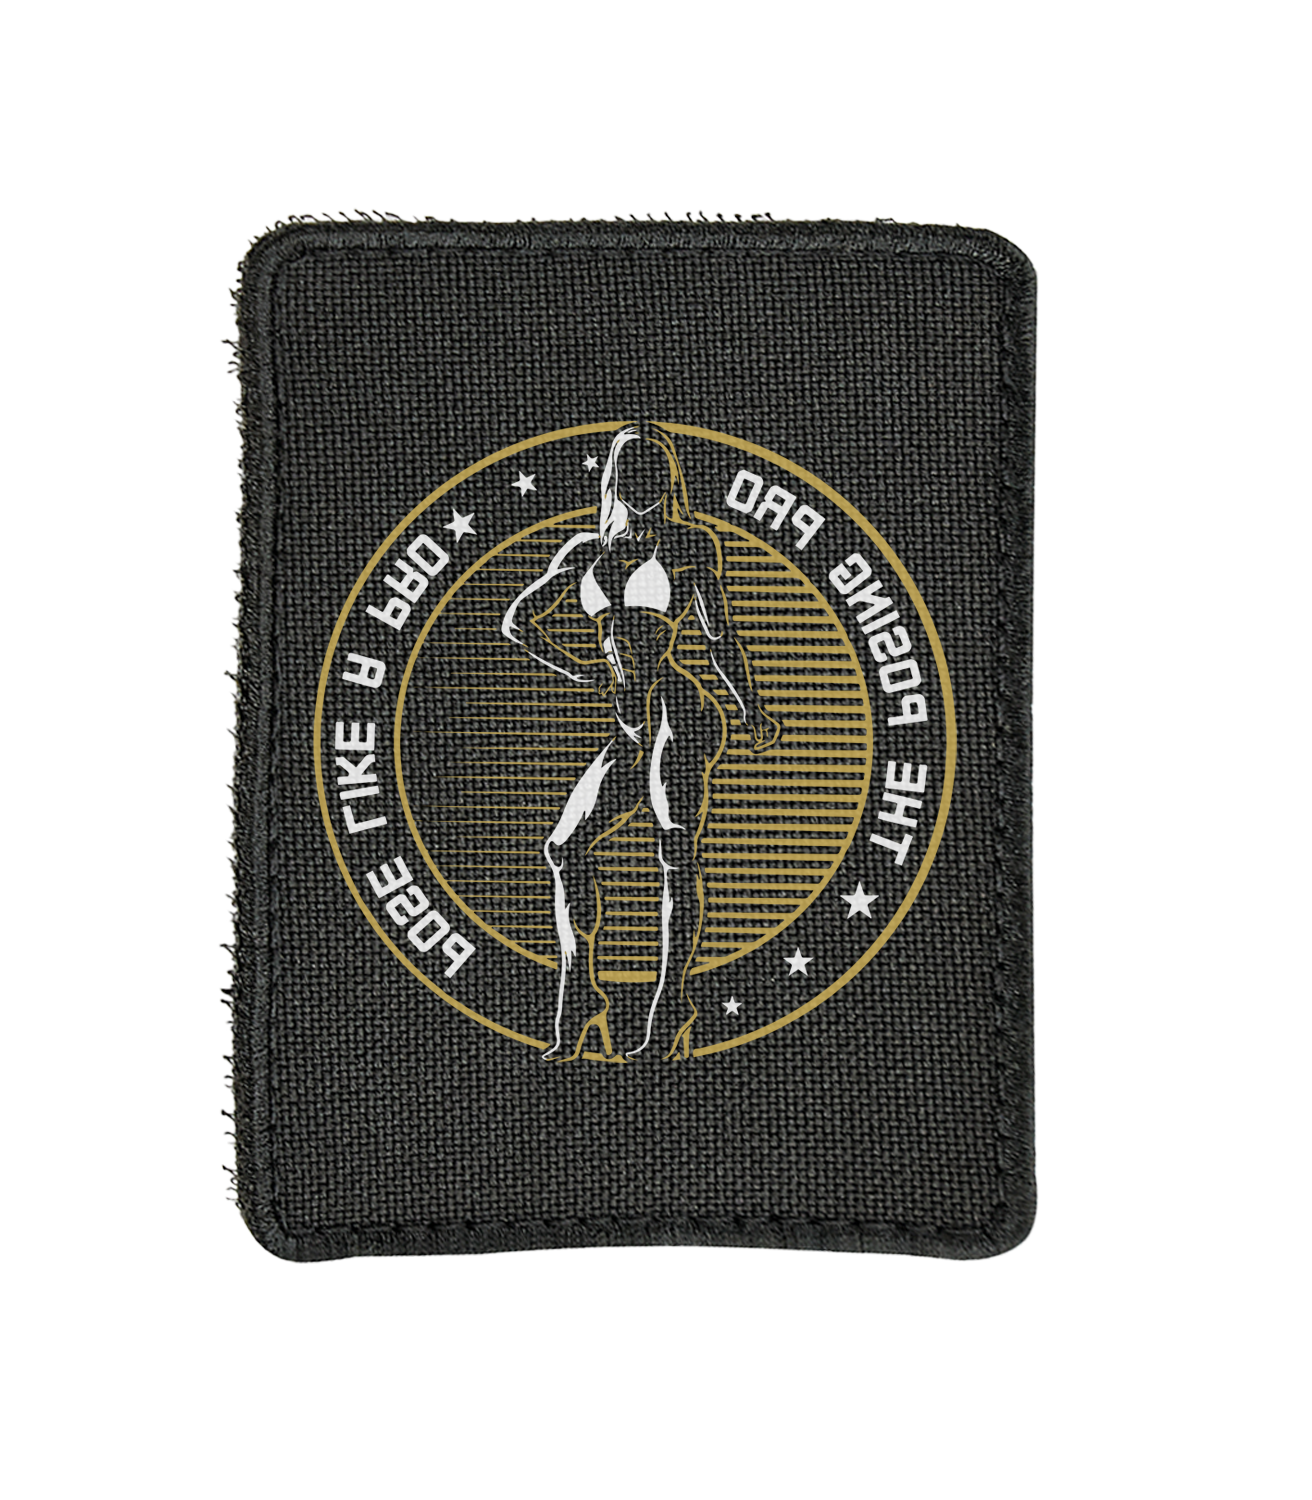 Extra Bag Patches